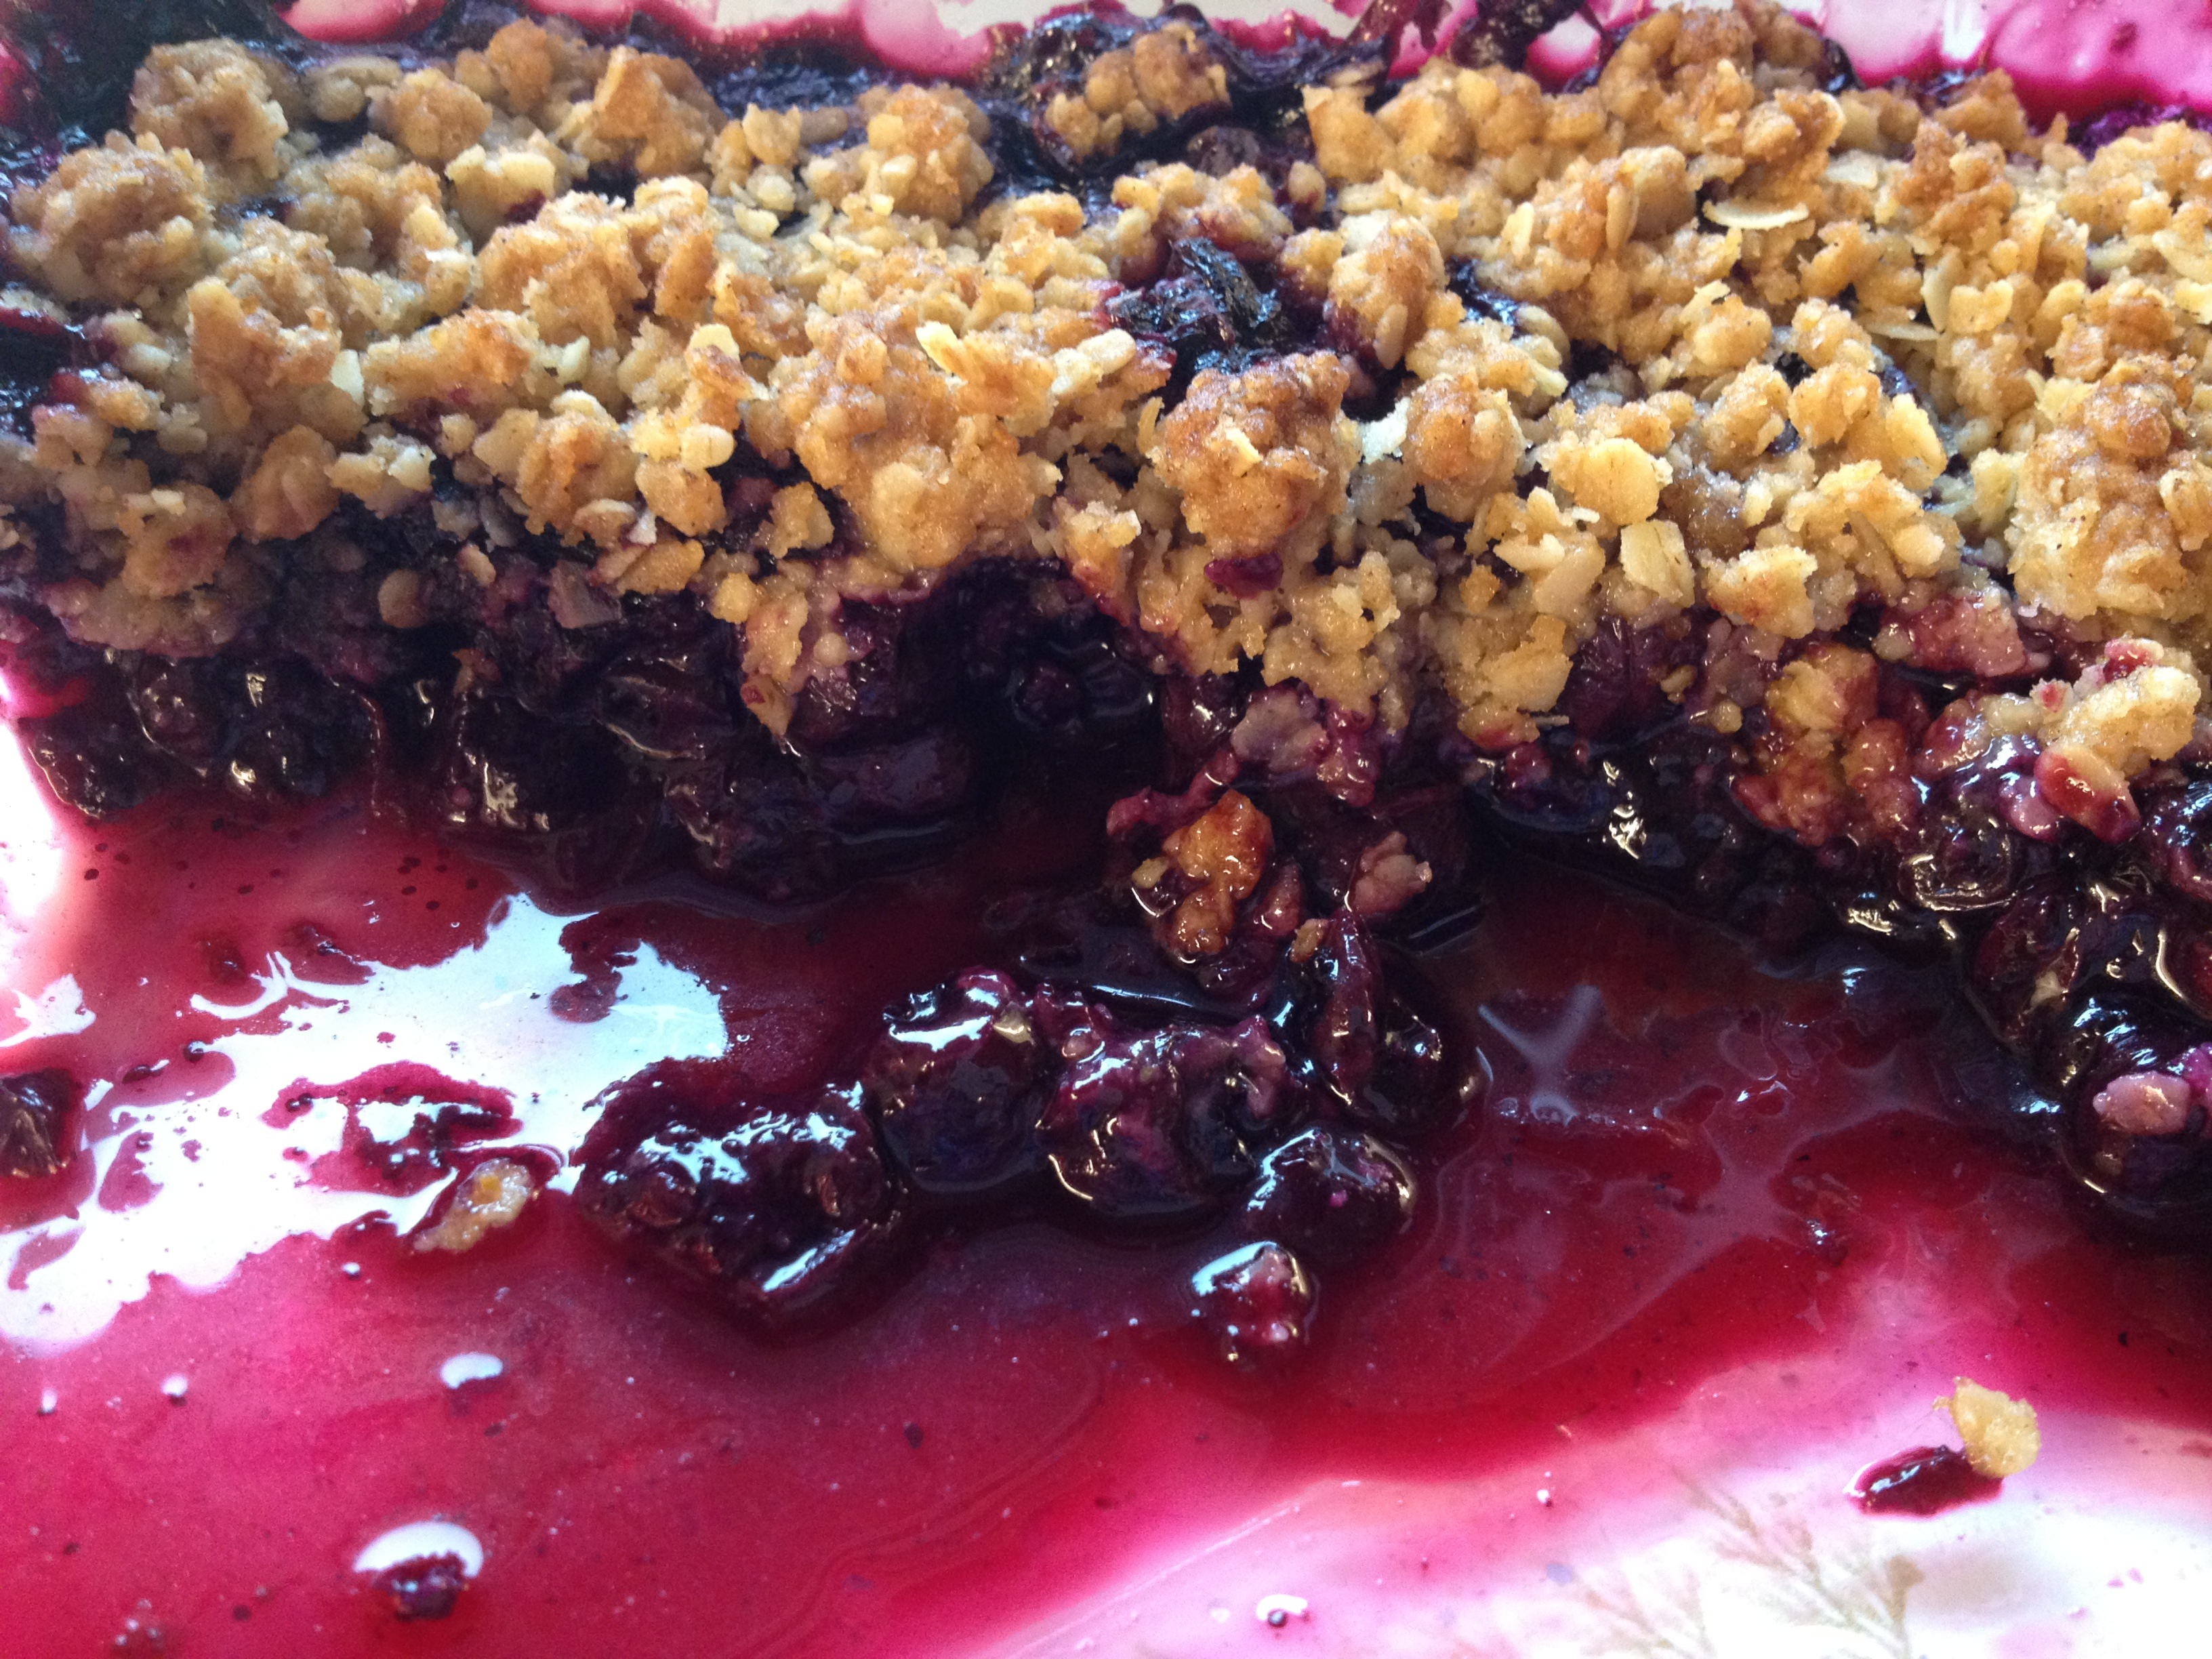 Blueberry crisp with an oatmeal topping.